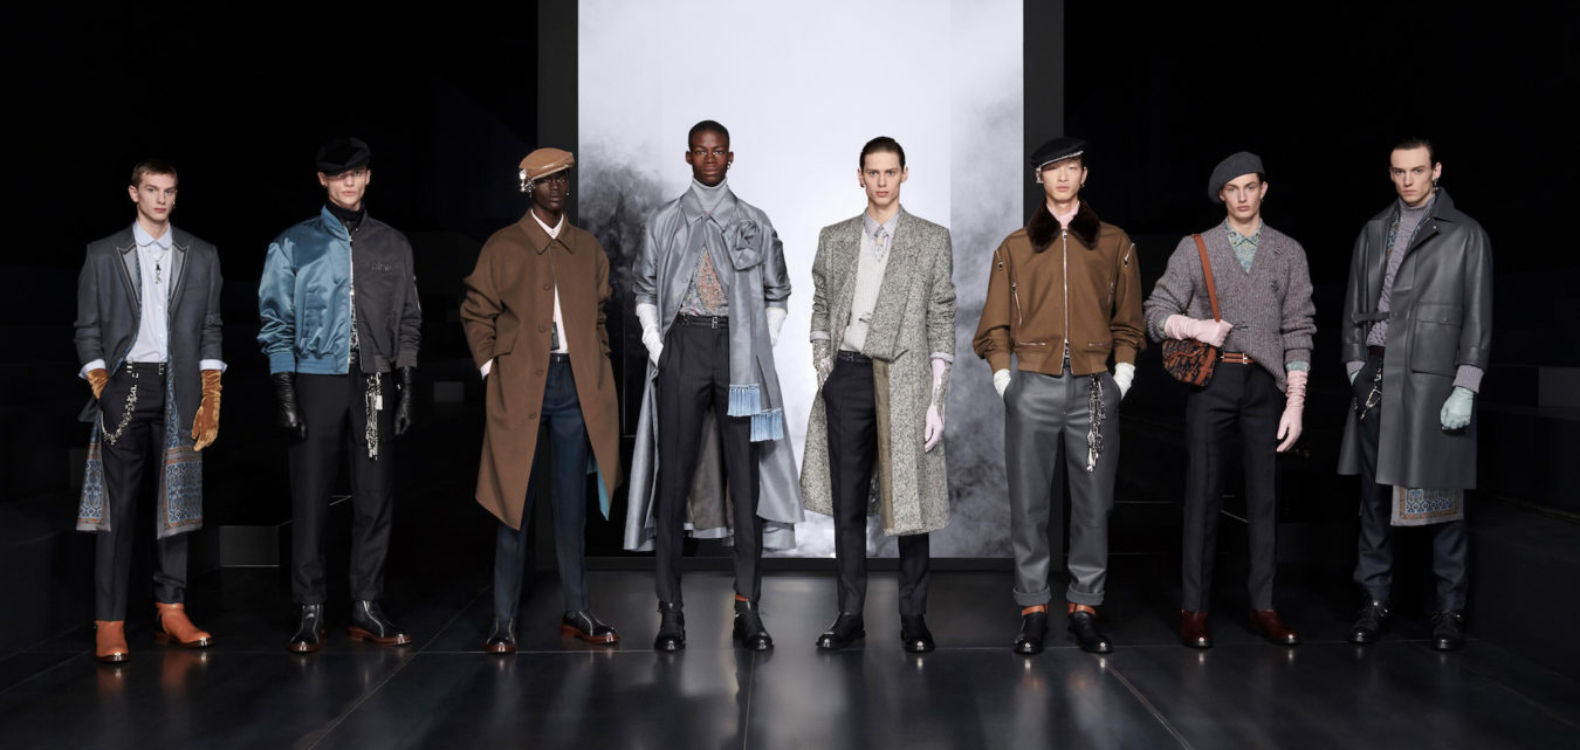 Autumn/Winter 2020 menswear highlights from all your favourite designers